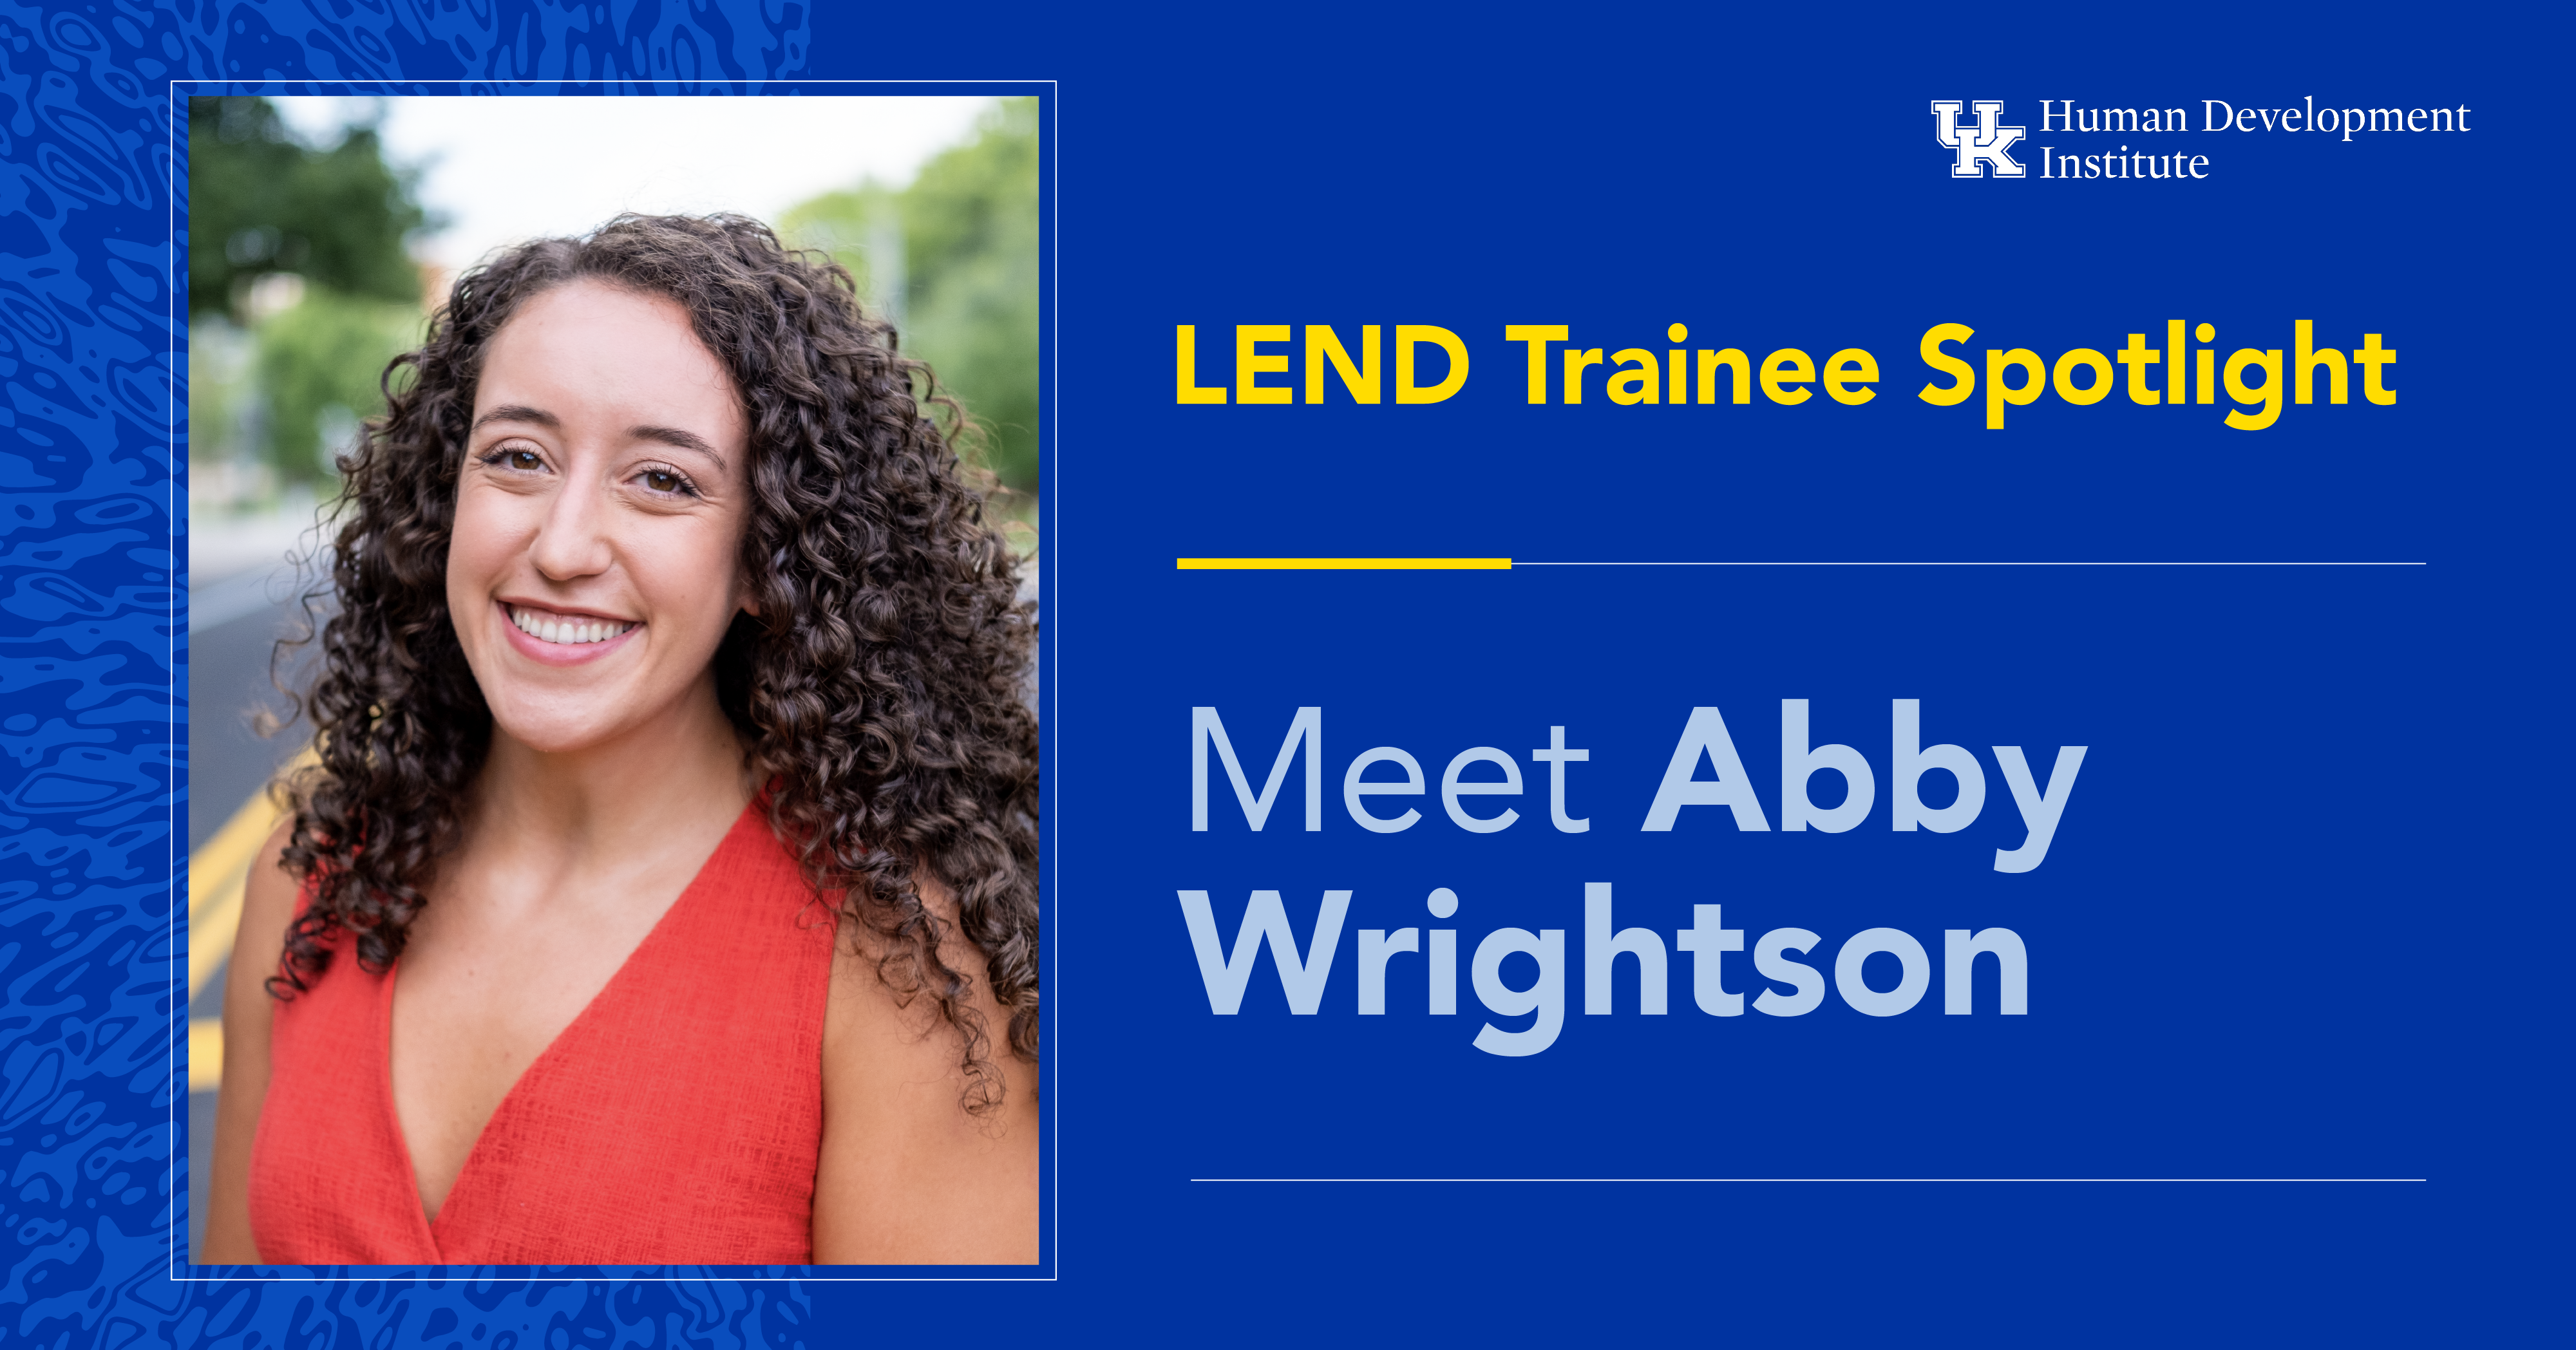 KYLEND Trainee: Meet Abby Wrightson. Abby has long, curly brown hair and is wearing an orange blouse, smiling for the camera.